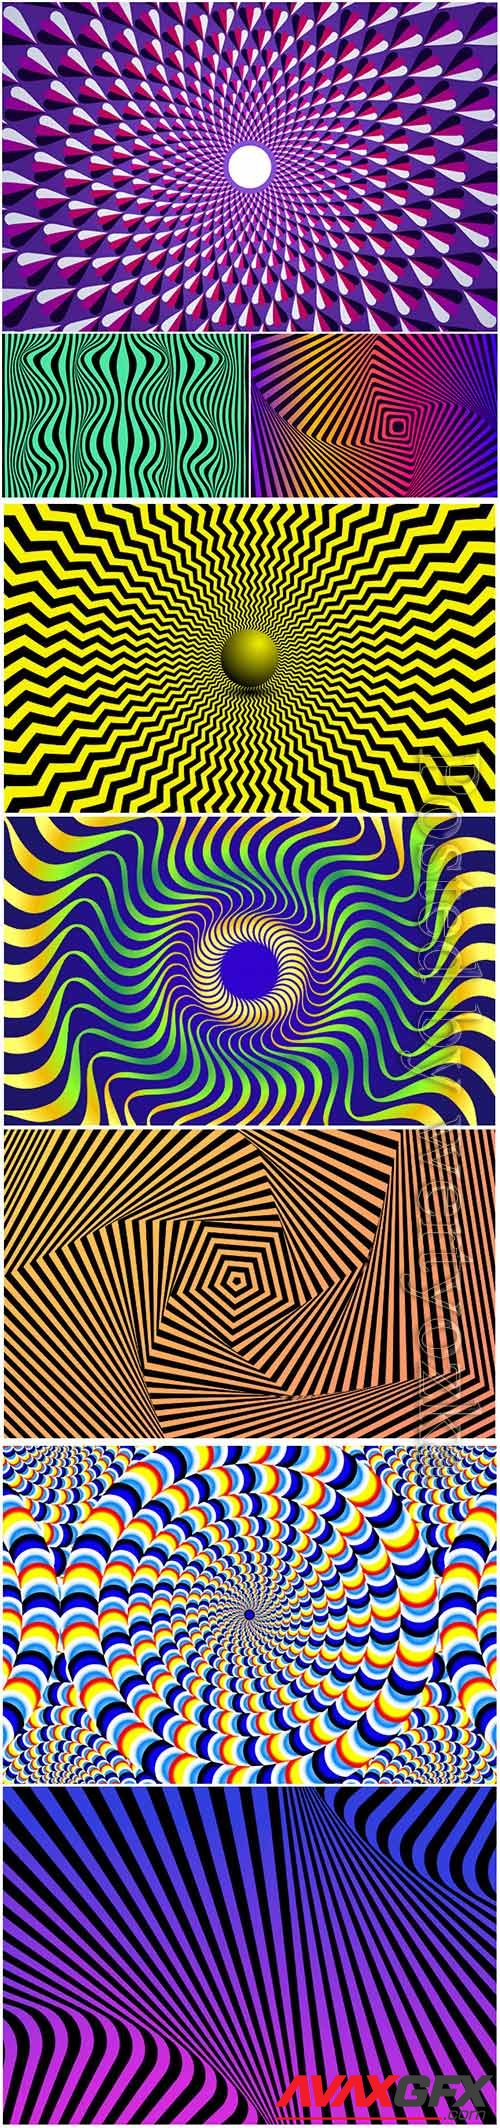 Psychedelic optical illusion vector background # 3